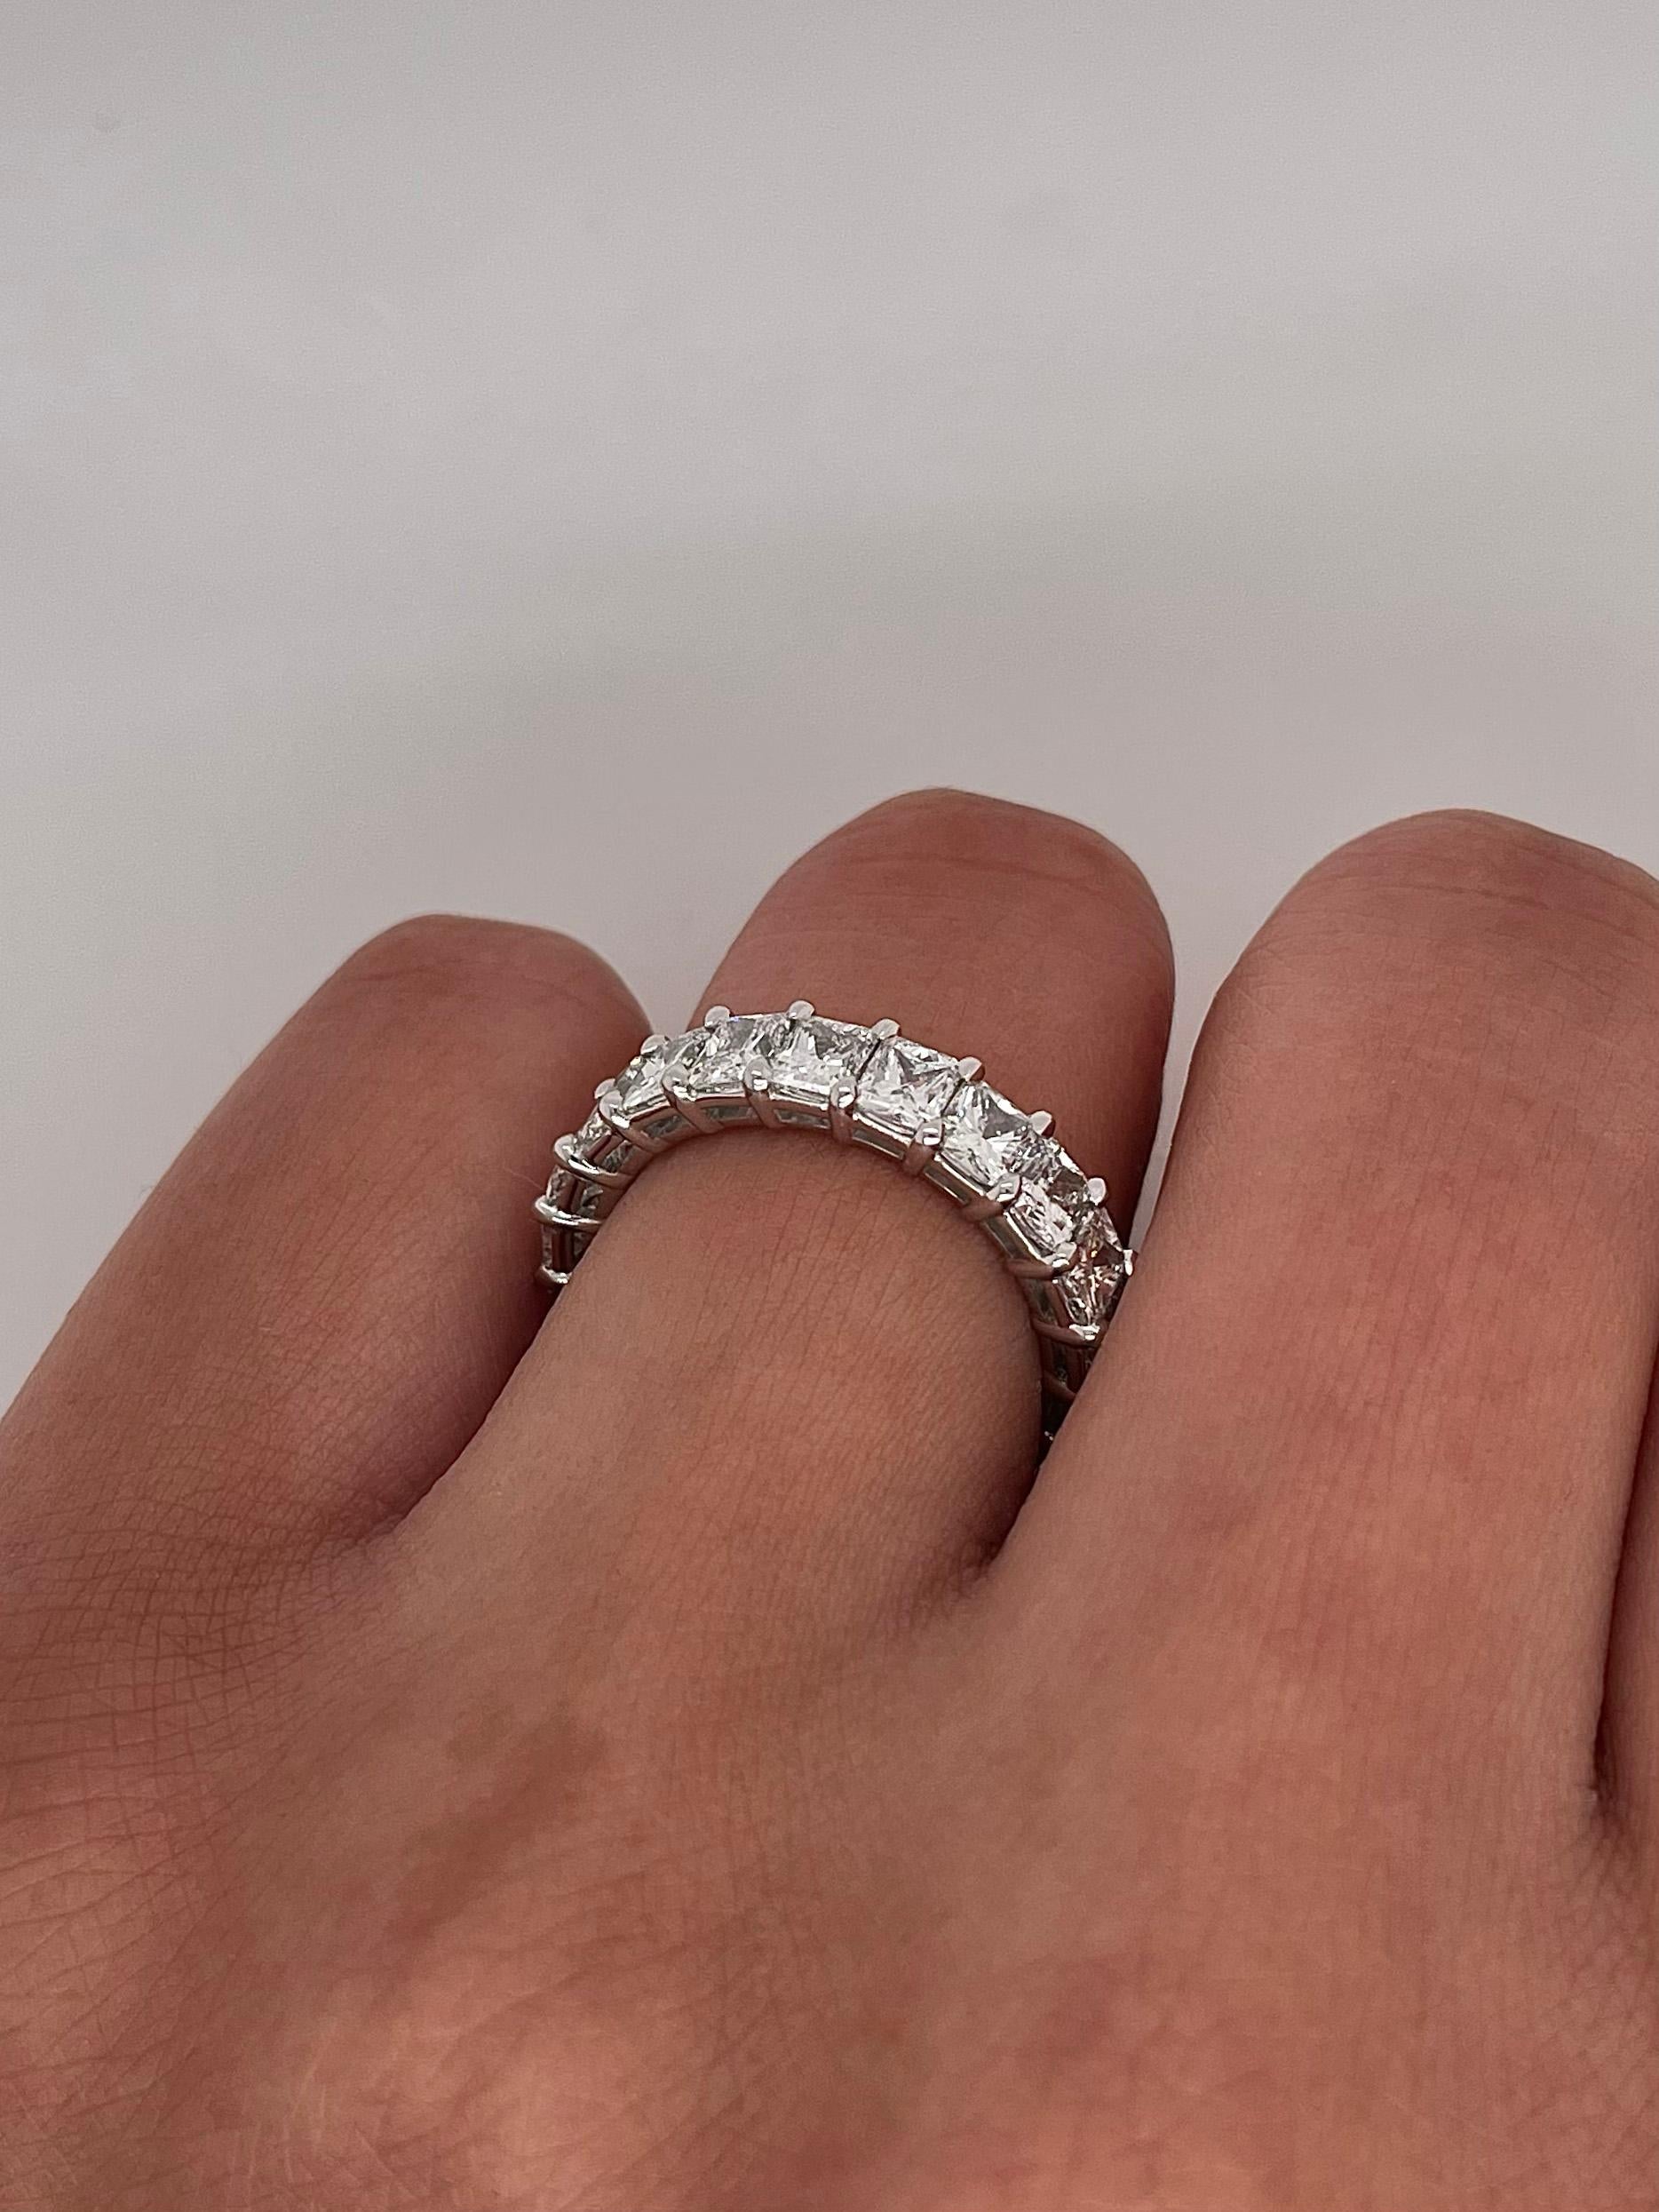 5.13 Total Carat Shared Prong Diamond Eternity Band in Platinum In New Condition For Sale In New York, NY